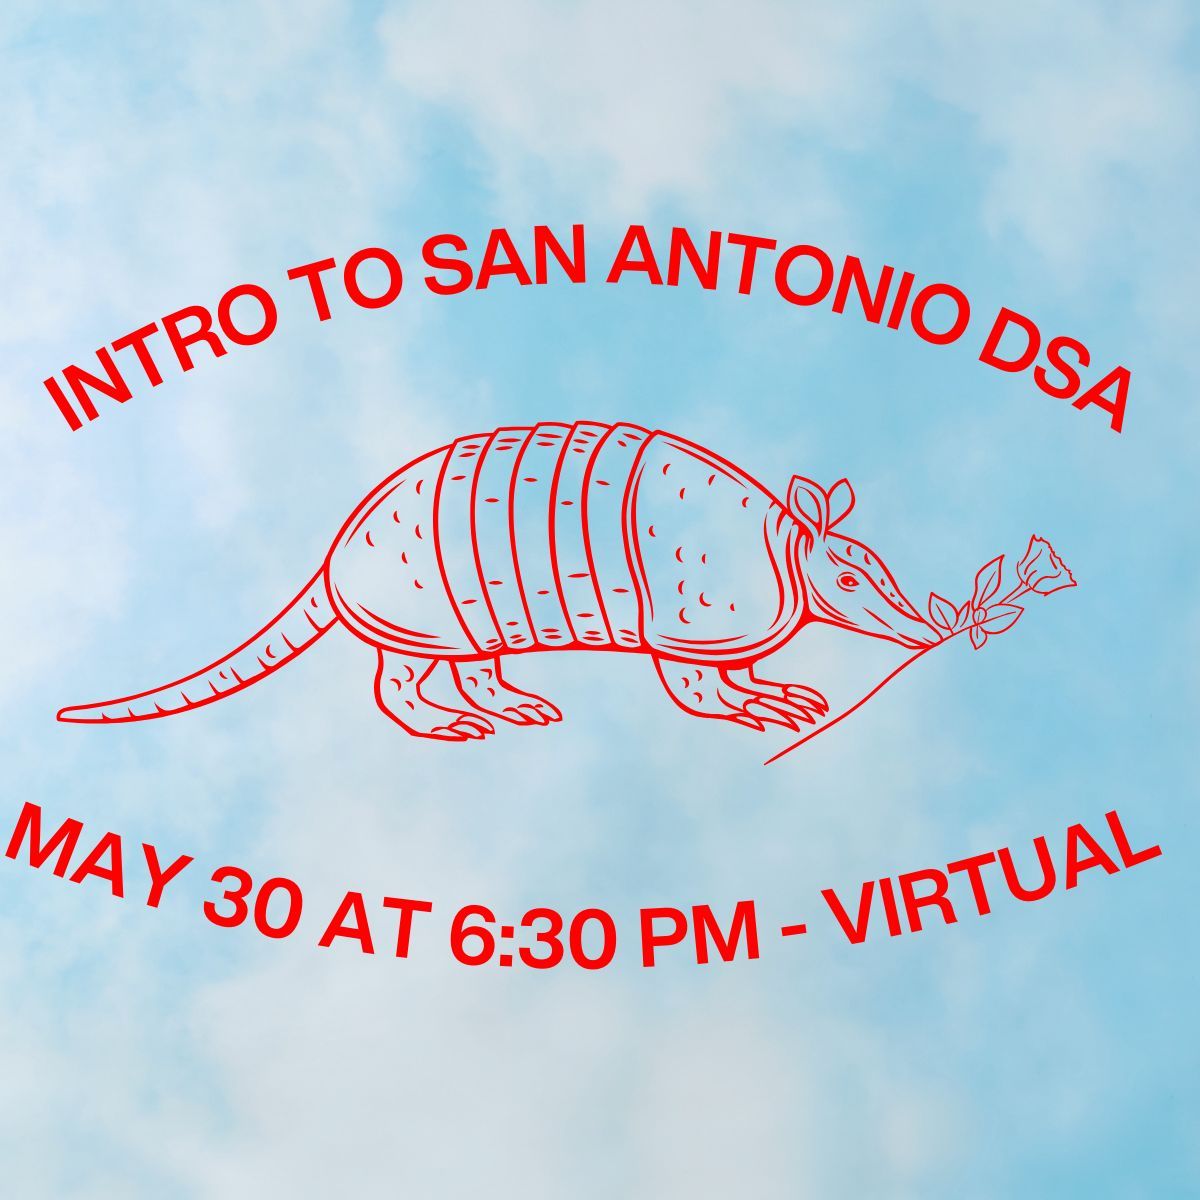 Are you a new or prospective member of San Antonio DSA? Join us this Thursday, May 30th, at 6:30 PM for a short presentation and discussion about what the chapter is up to and how you can get involved! RSVP to get the meeting link: actionnetwork.org/events/intro-t…